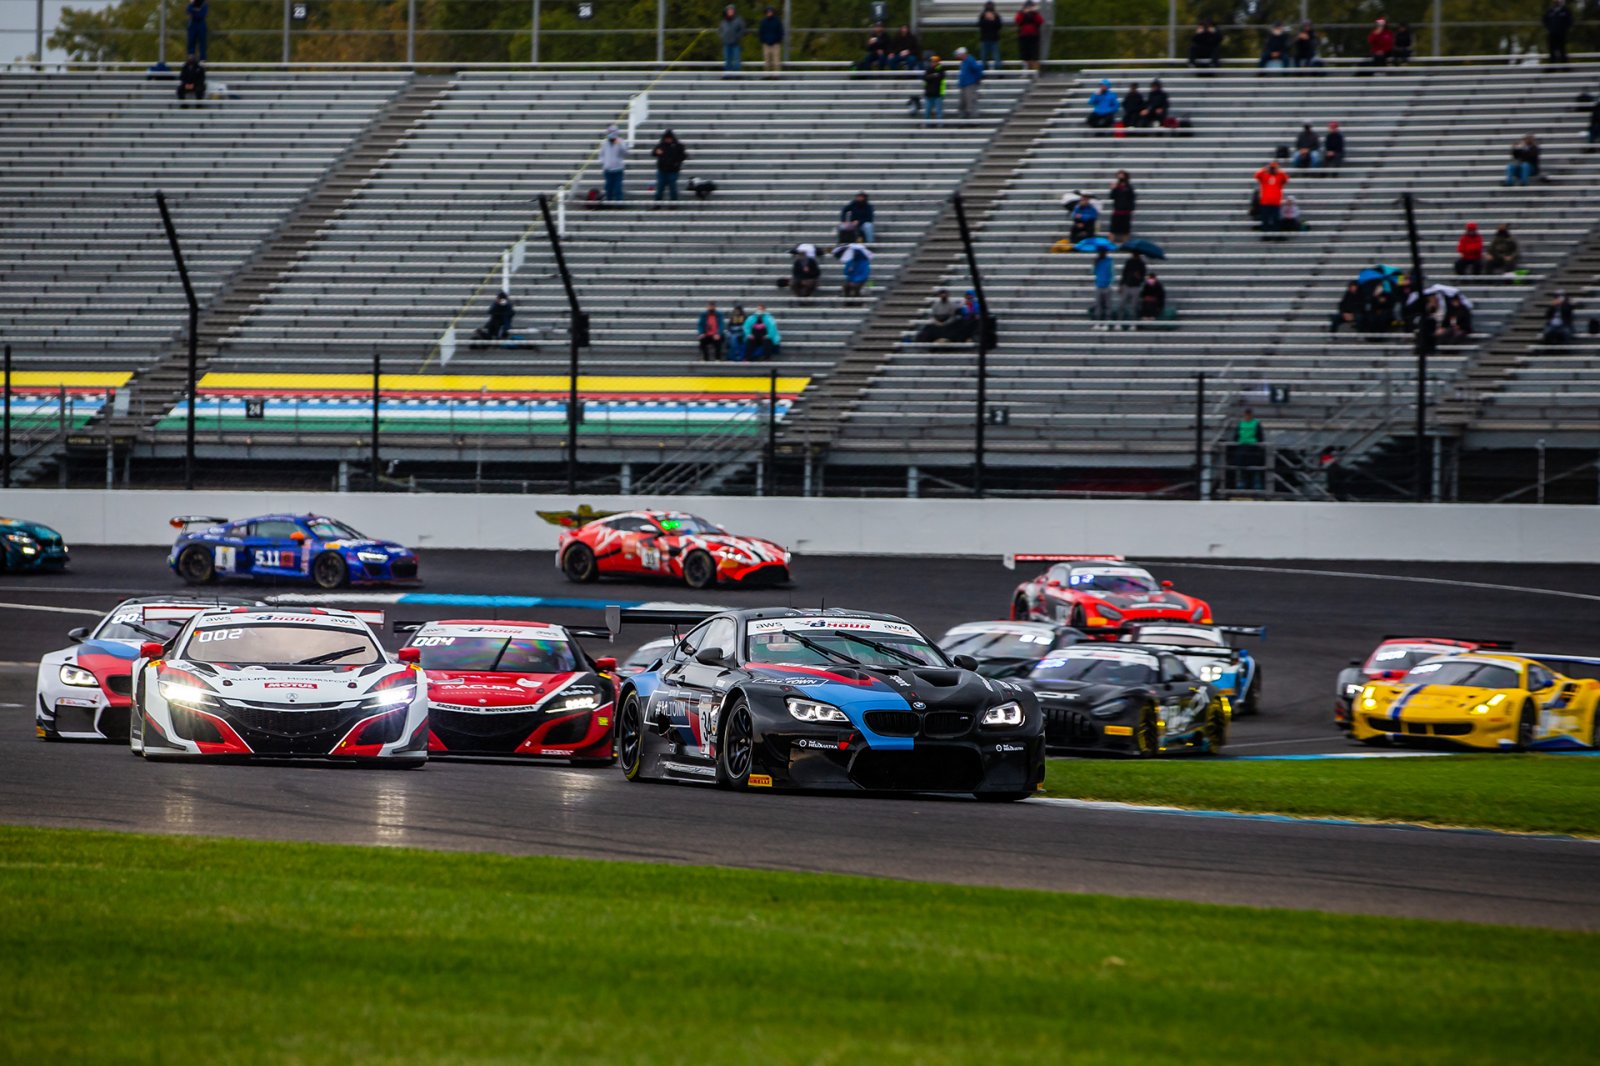 Gallagher Leads GT4 Field at Mid-Point of Indianapolis 8 Hour at the Brickyard